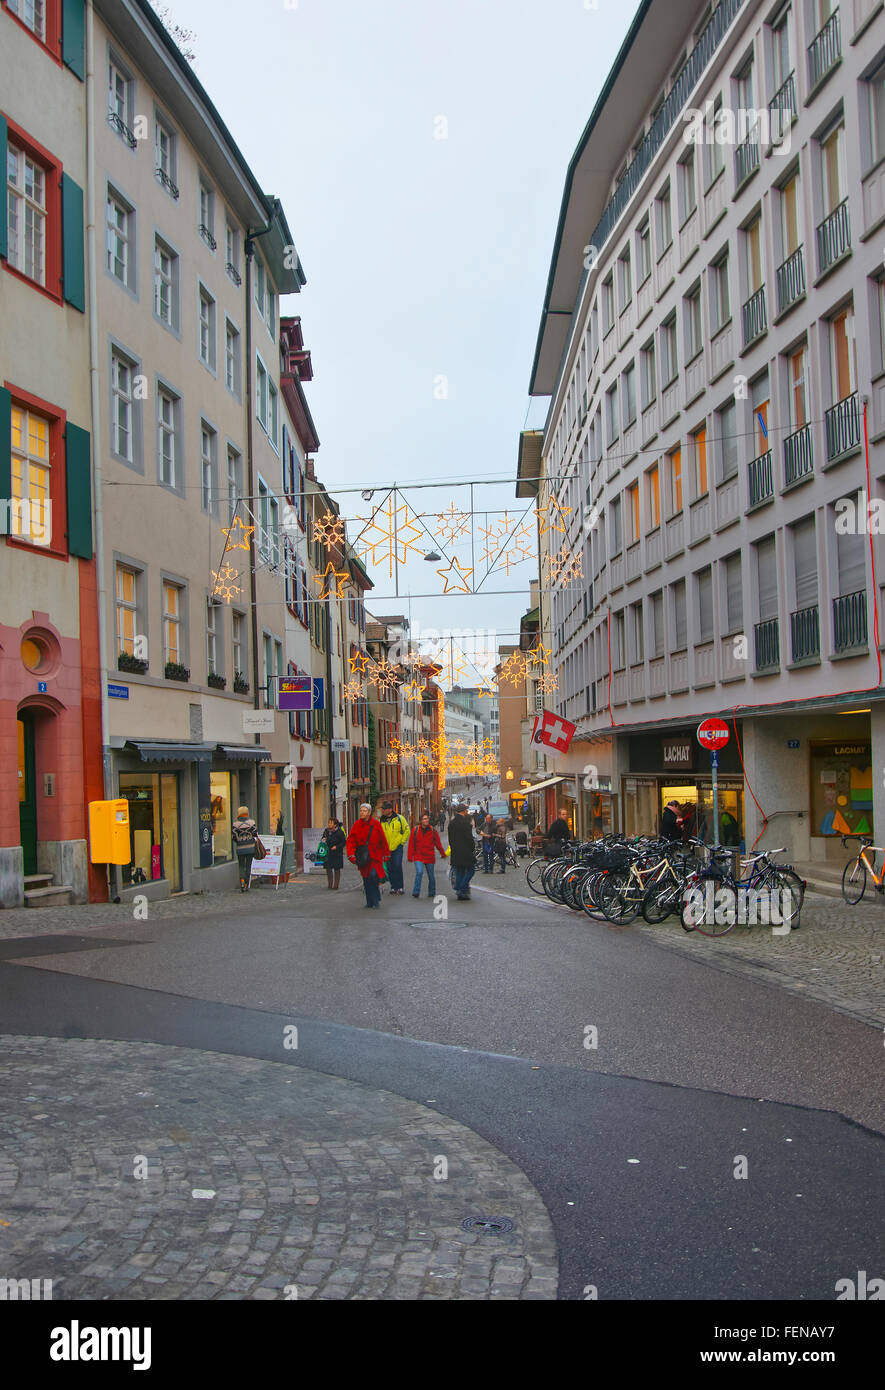 BASEL, SWITZERLAND - JANUARY 1, 2014: Street view with Christmas decoration in Old Town in Basel. Basel is a third most populous city in Switzerland. It is located on the river Rhine. Stock Photo